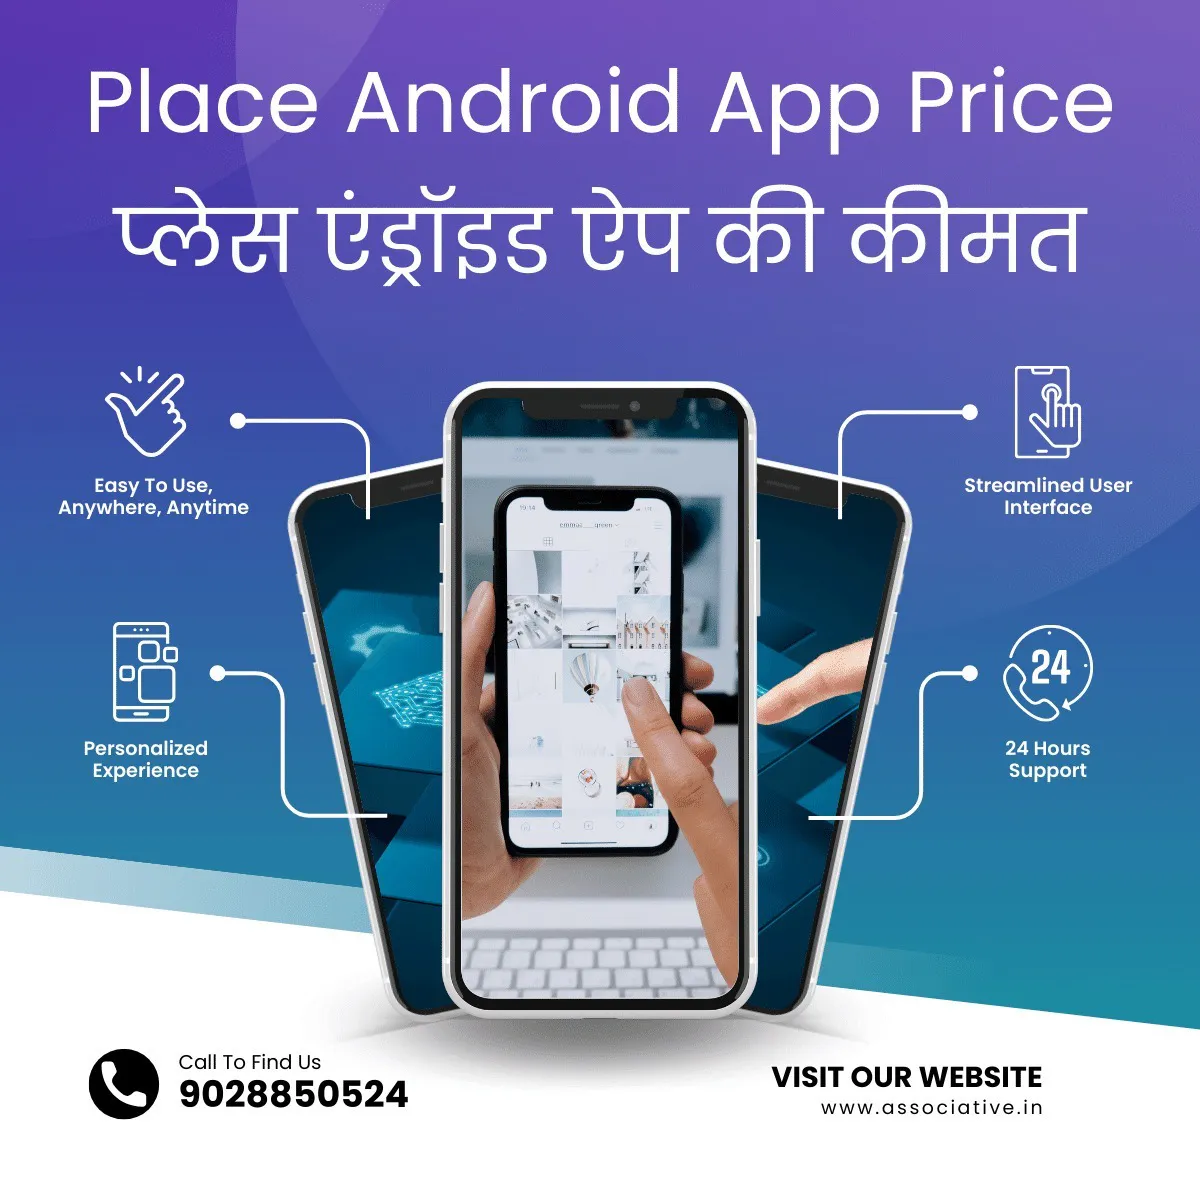 Place Android App